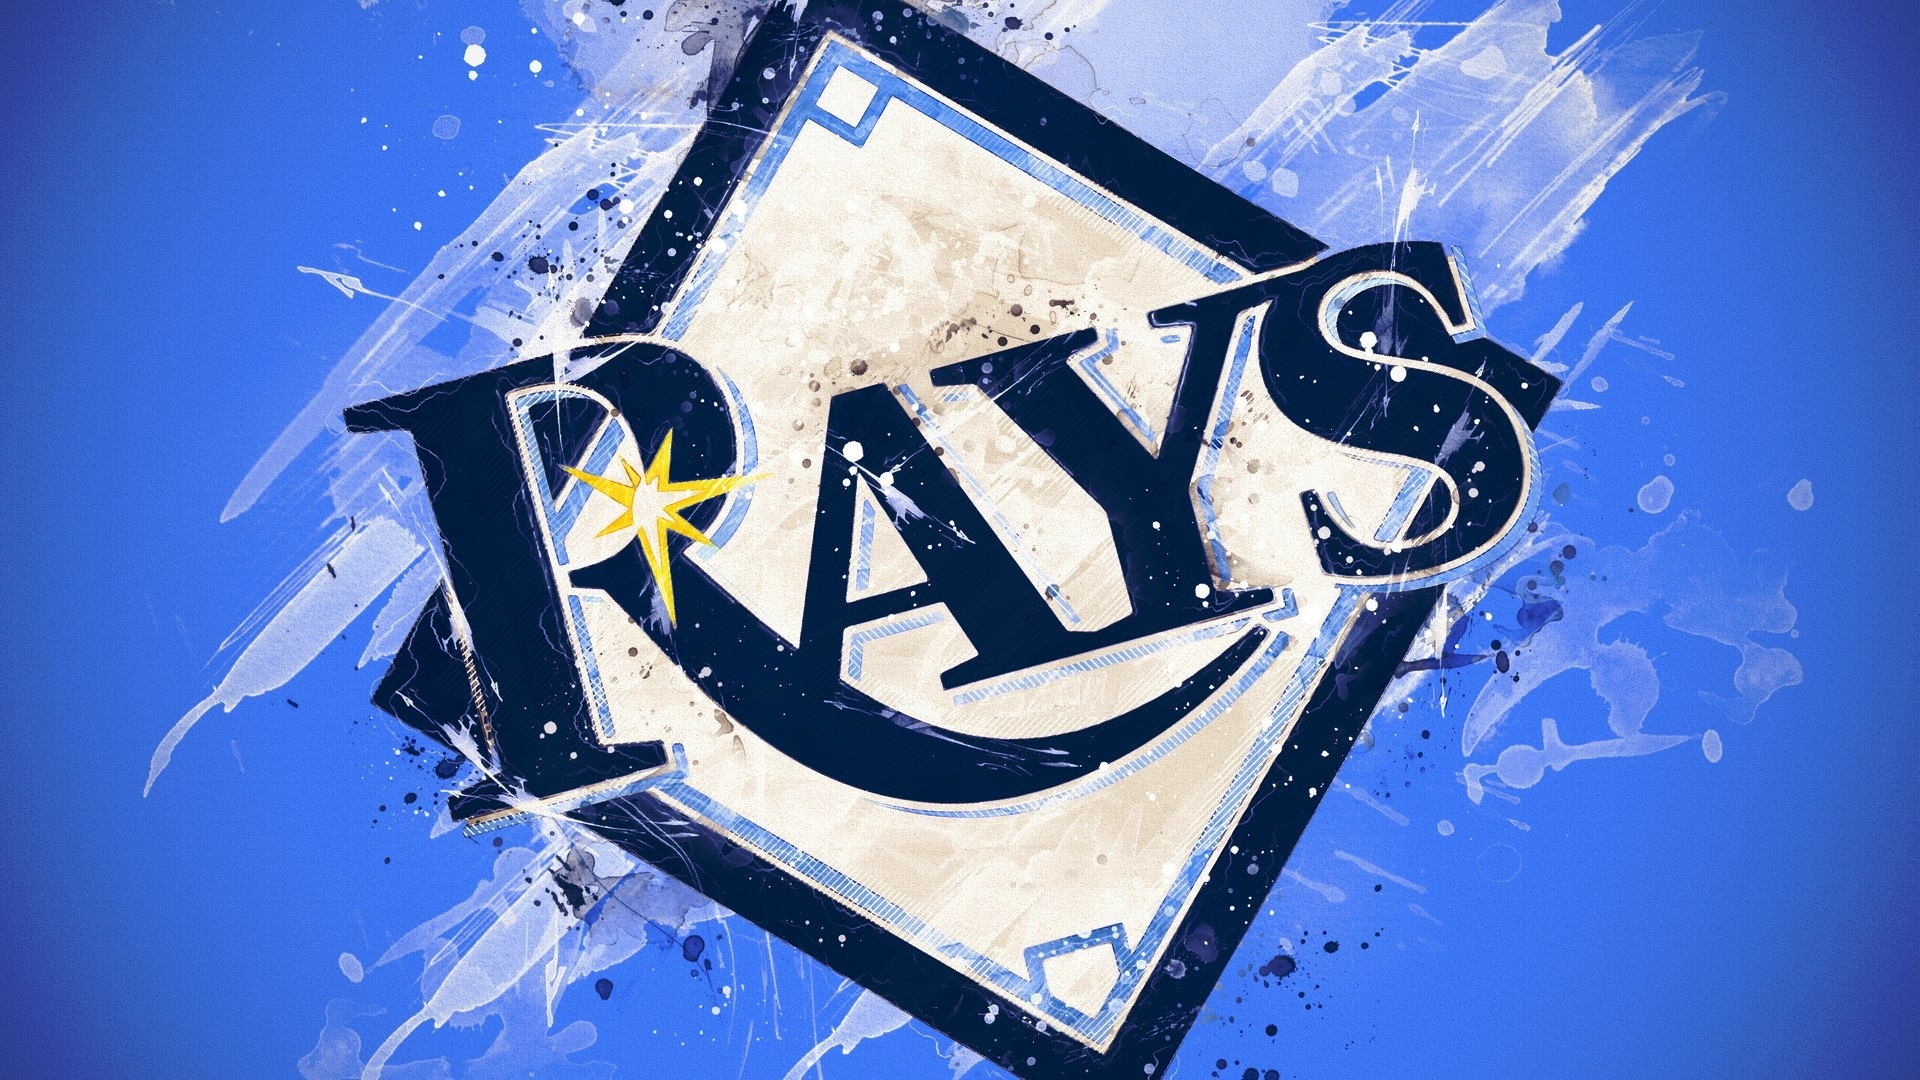 Tampa Bay Rays Wallpaper with high-resolution 1920x1080 pixel. You can use this wallpaper for Mac Desktop Wallpaper, Laptop Screensavers, Android Wallpapers, Tablet or iPhone Home Screen and another mobile phone device